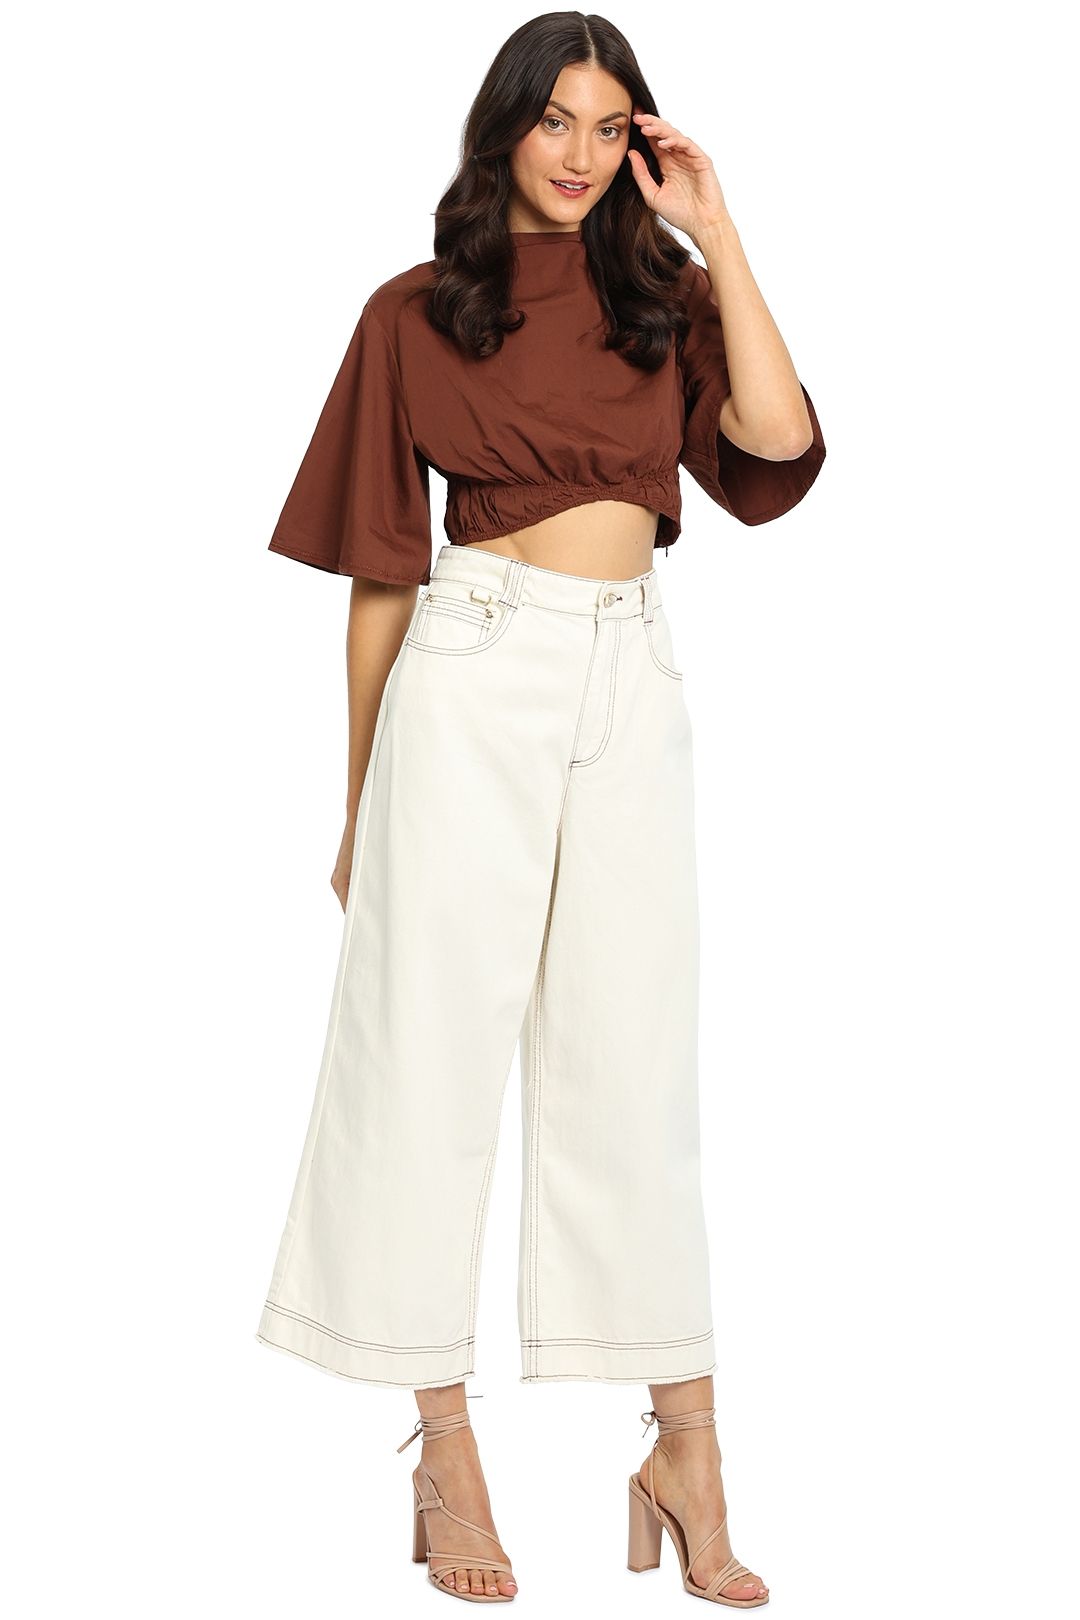 Coppola Top in Brown Camilla and Marc crop